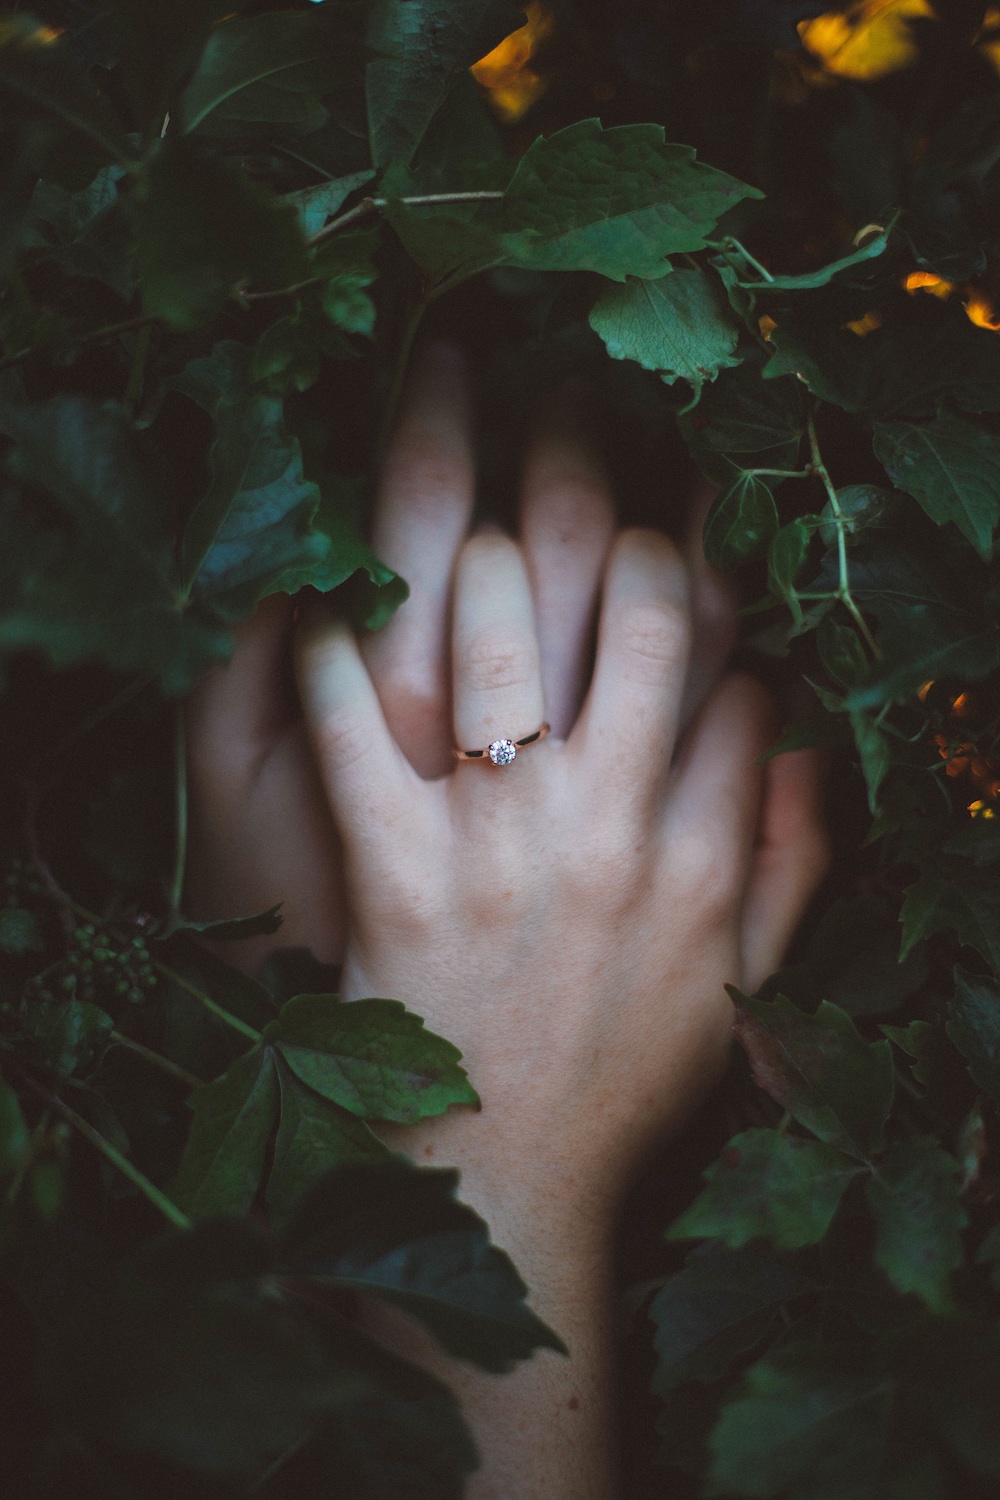 Unsplash - Girls With Small Engagement Rings , HD Wallpaper & Backgrounds